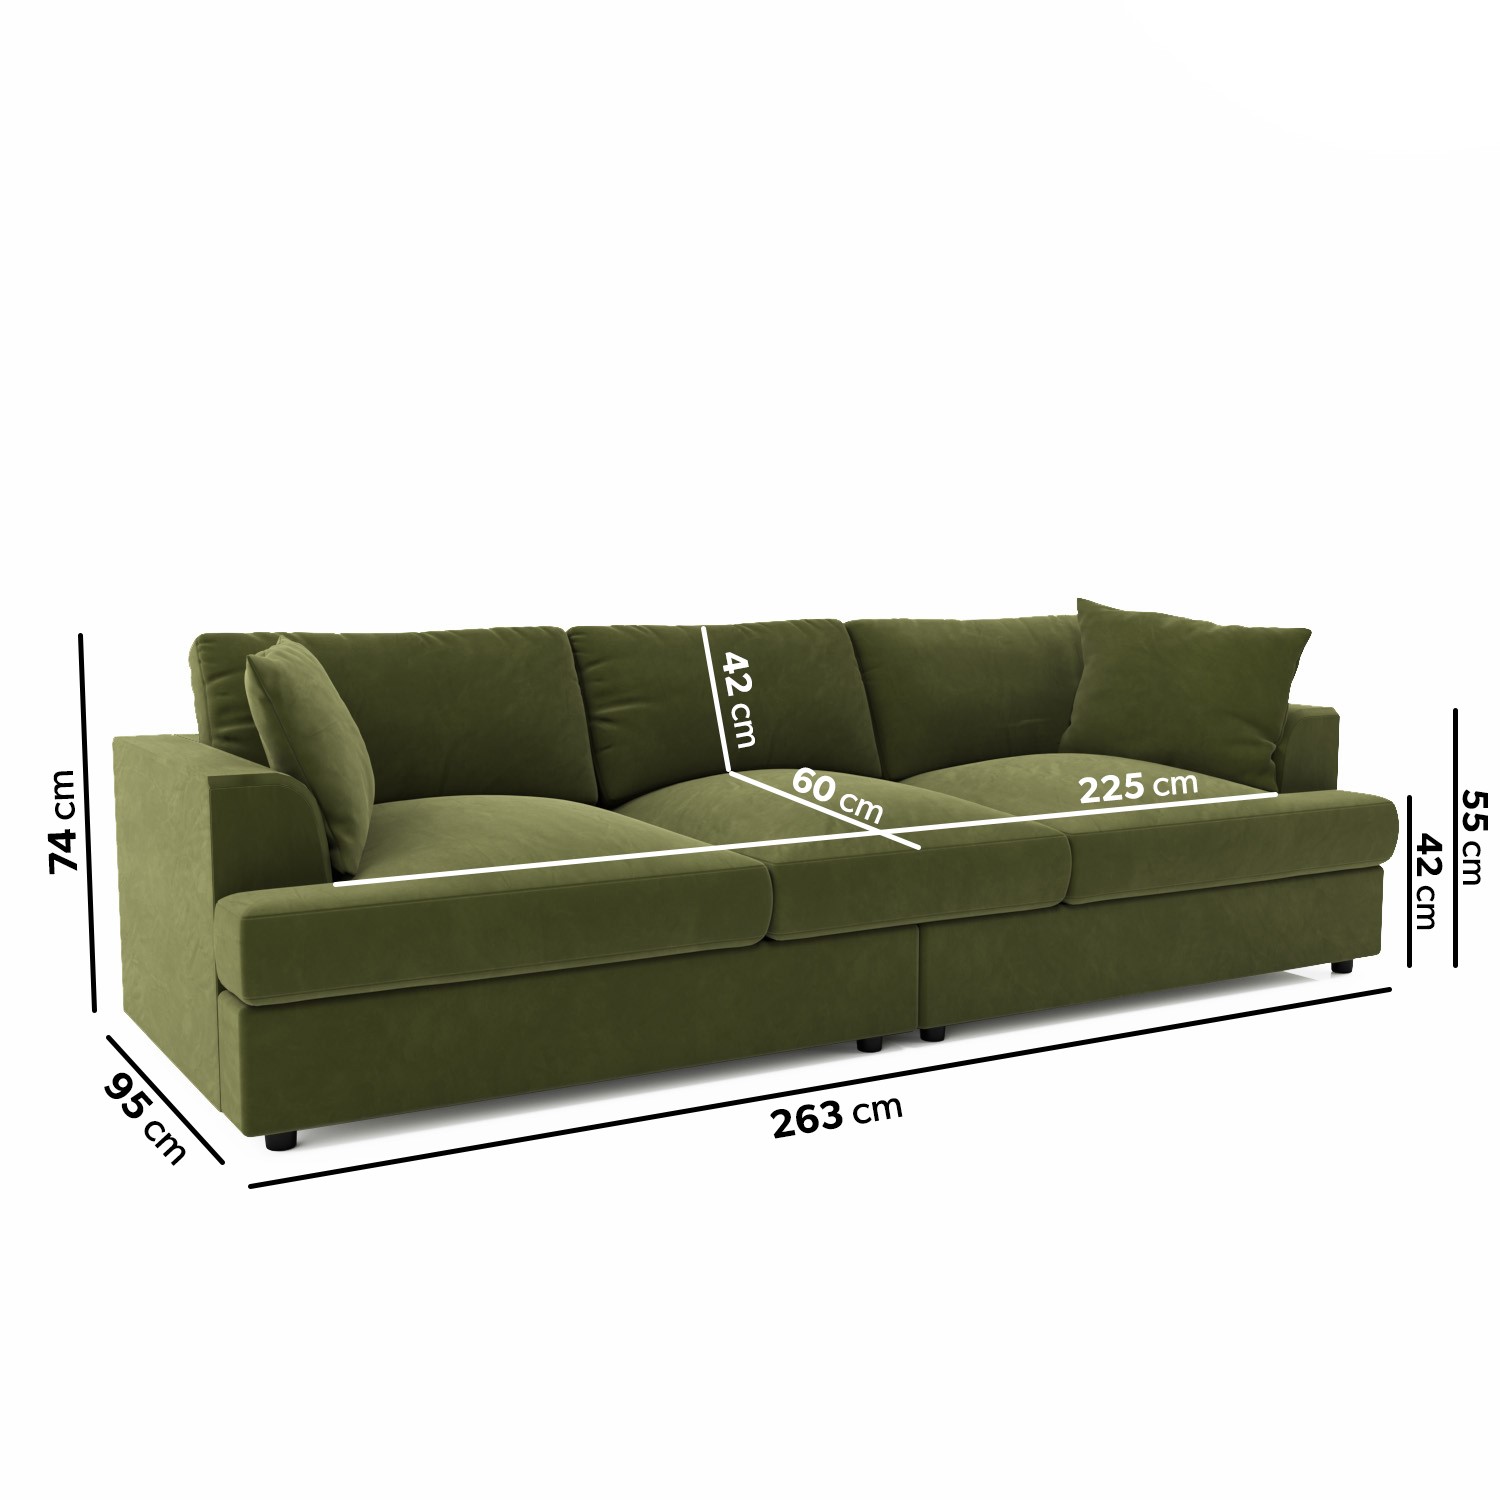 Read more about Large olive green velvet sofa seats 4 august